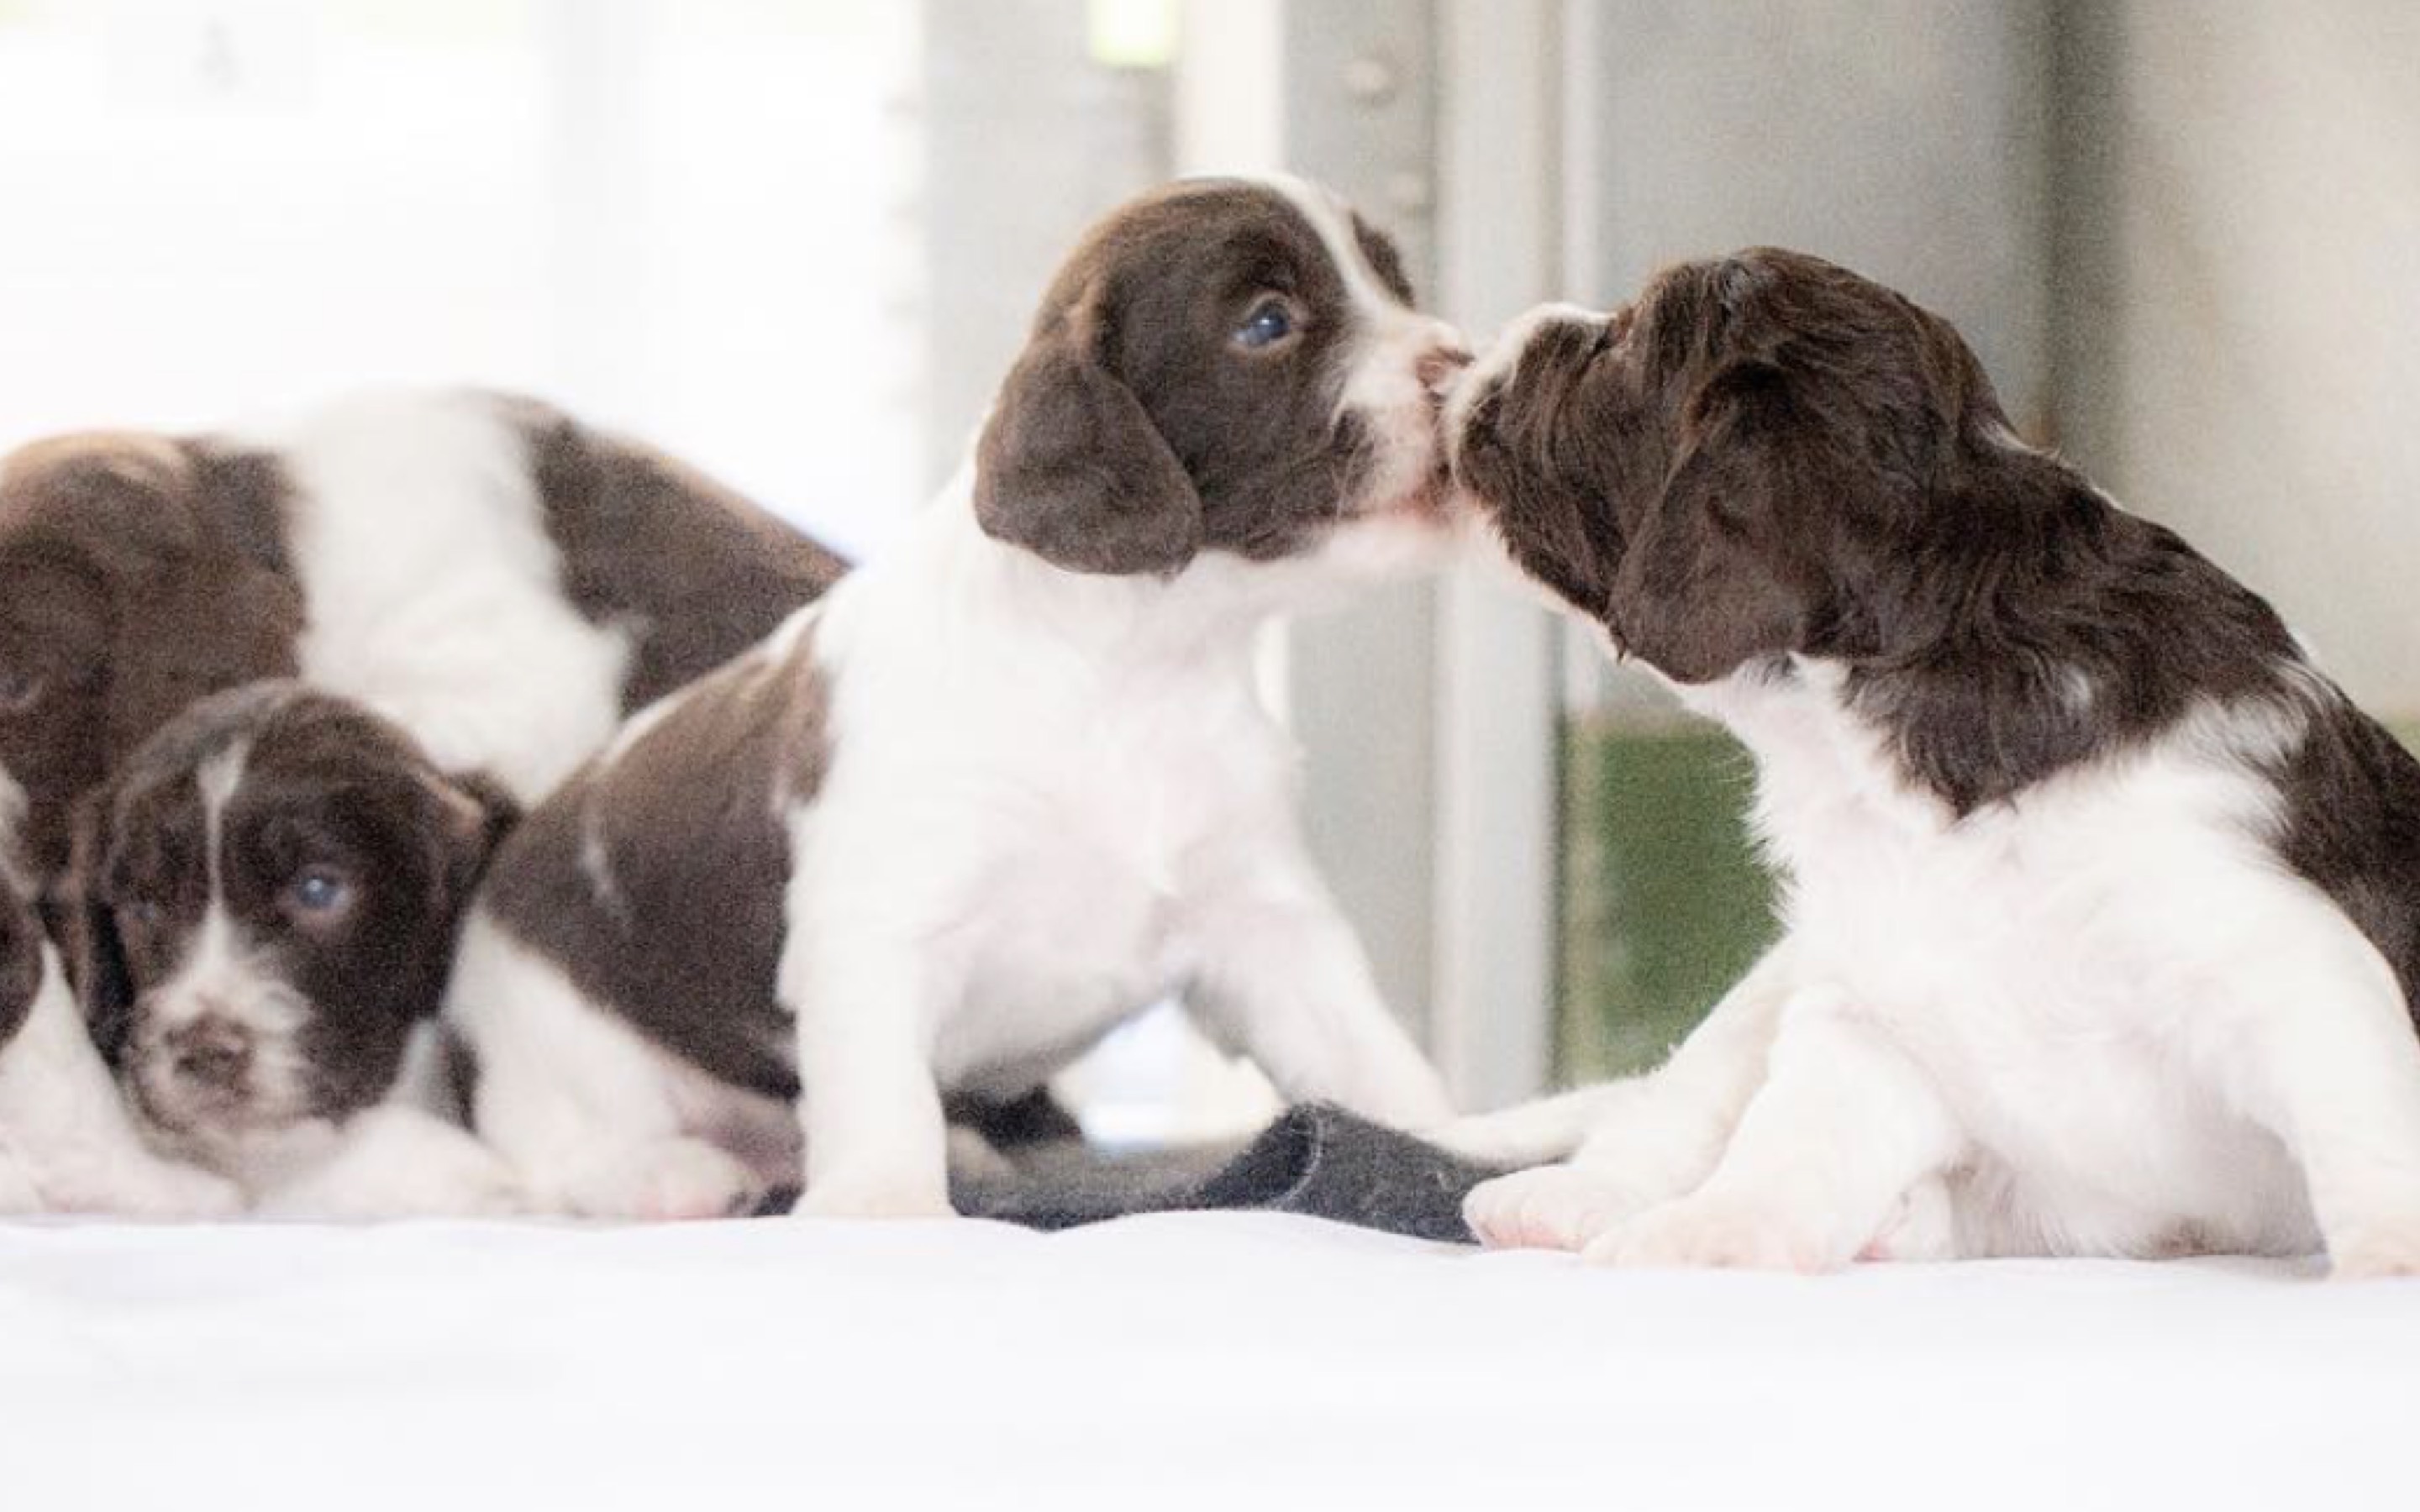 The police welcomed five new springer spaniel pups last month. Photo via Instagram/Hong Kong Police Force.